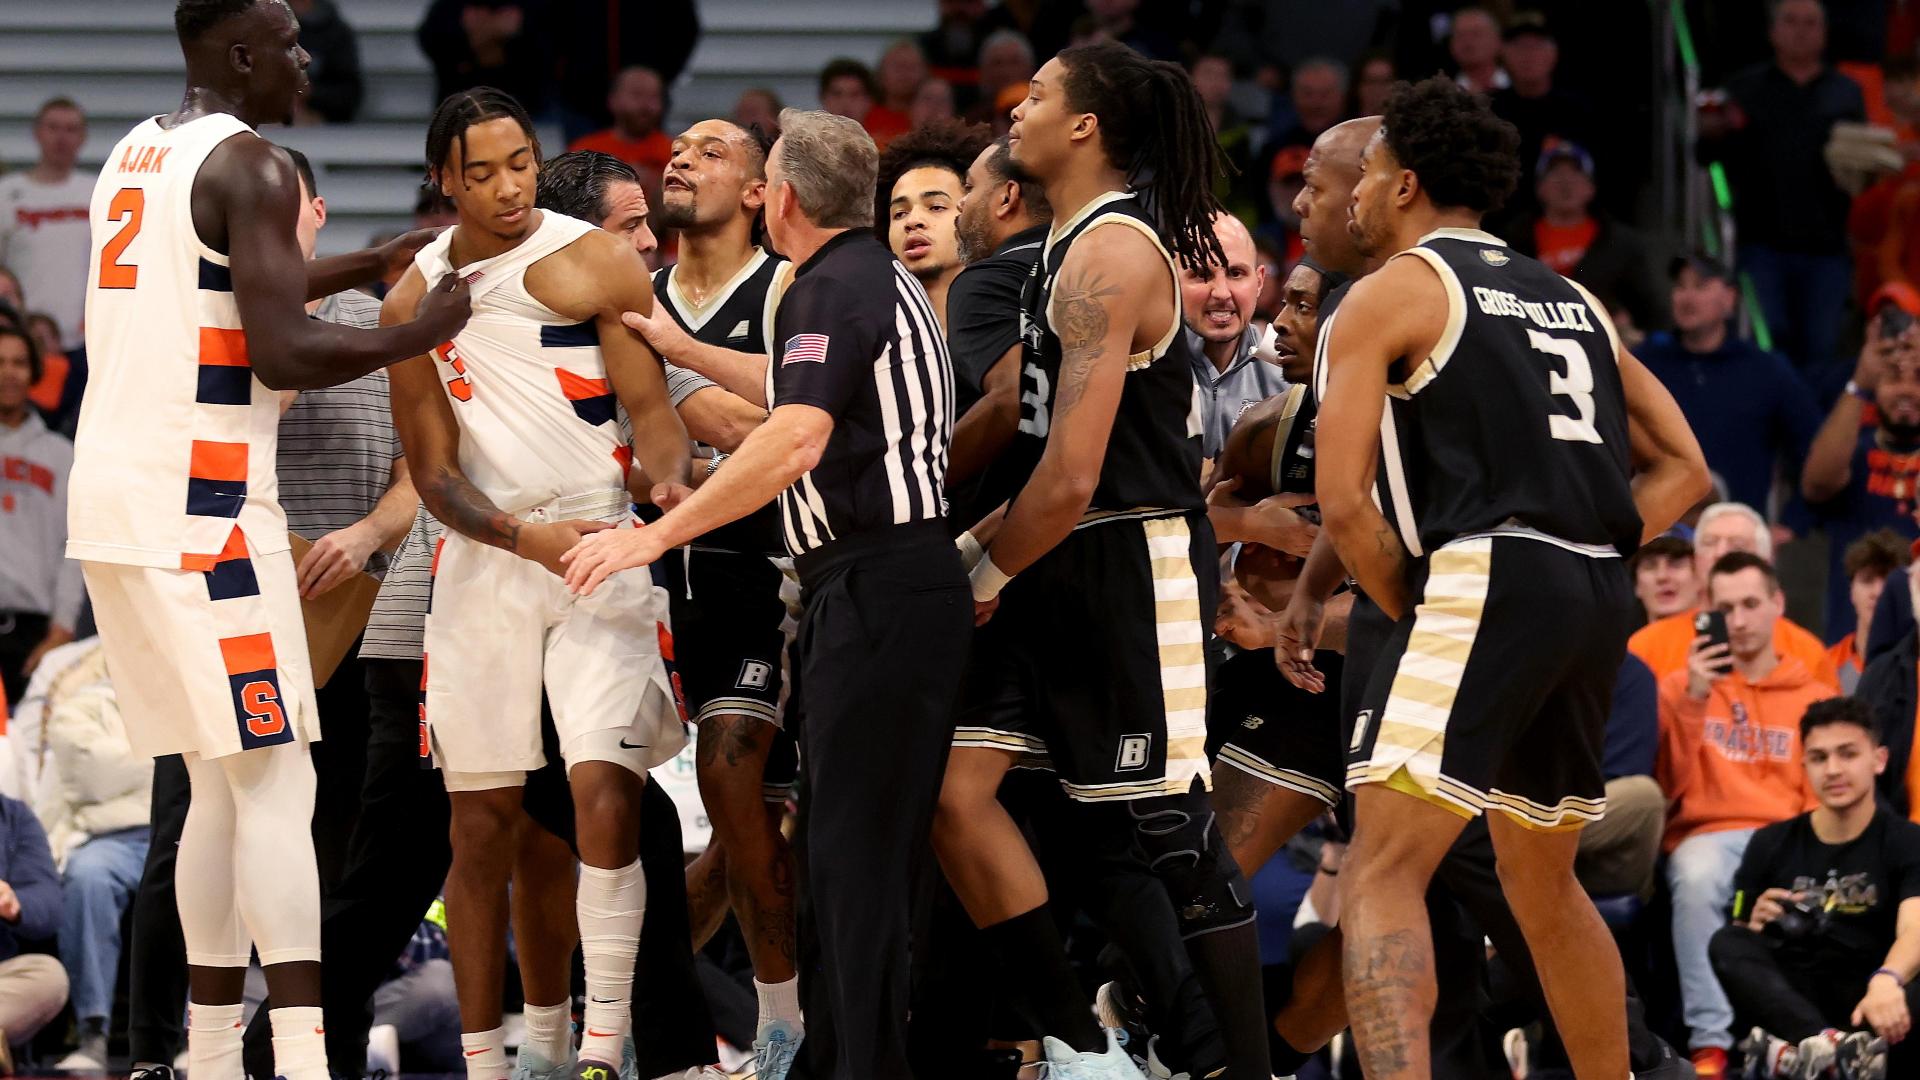 Multiple ejections occur after Syracuse, Bryant players slap each other